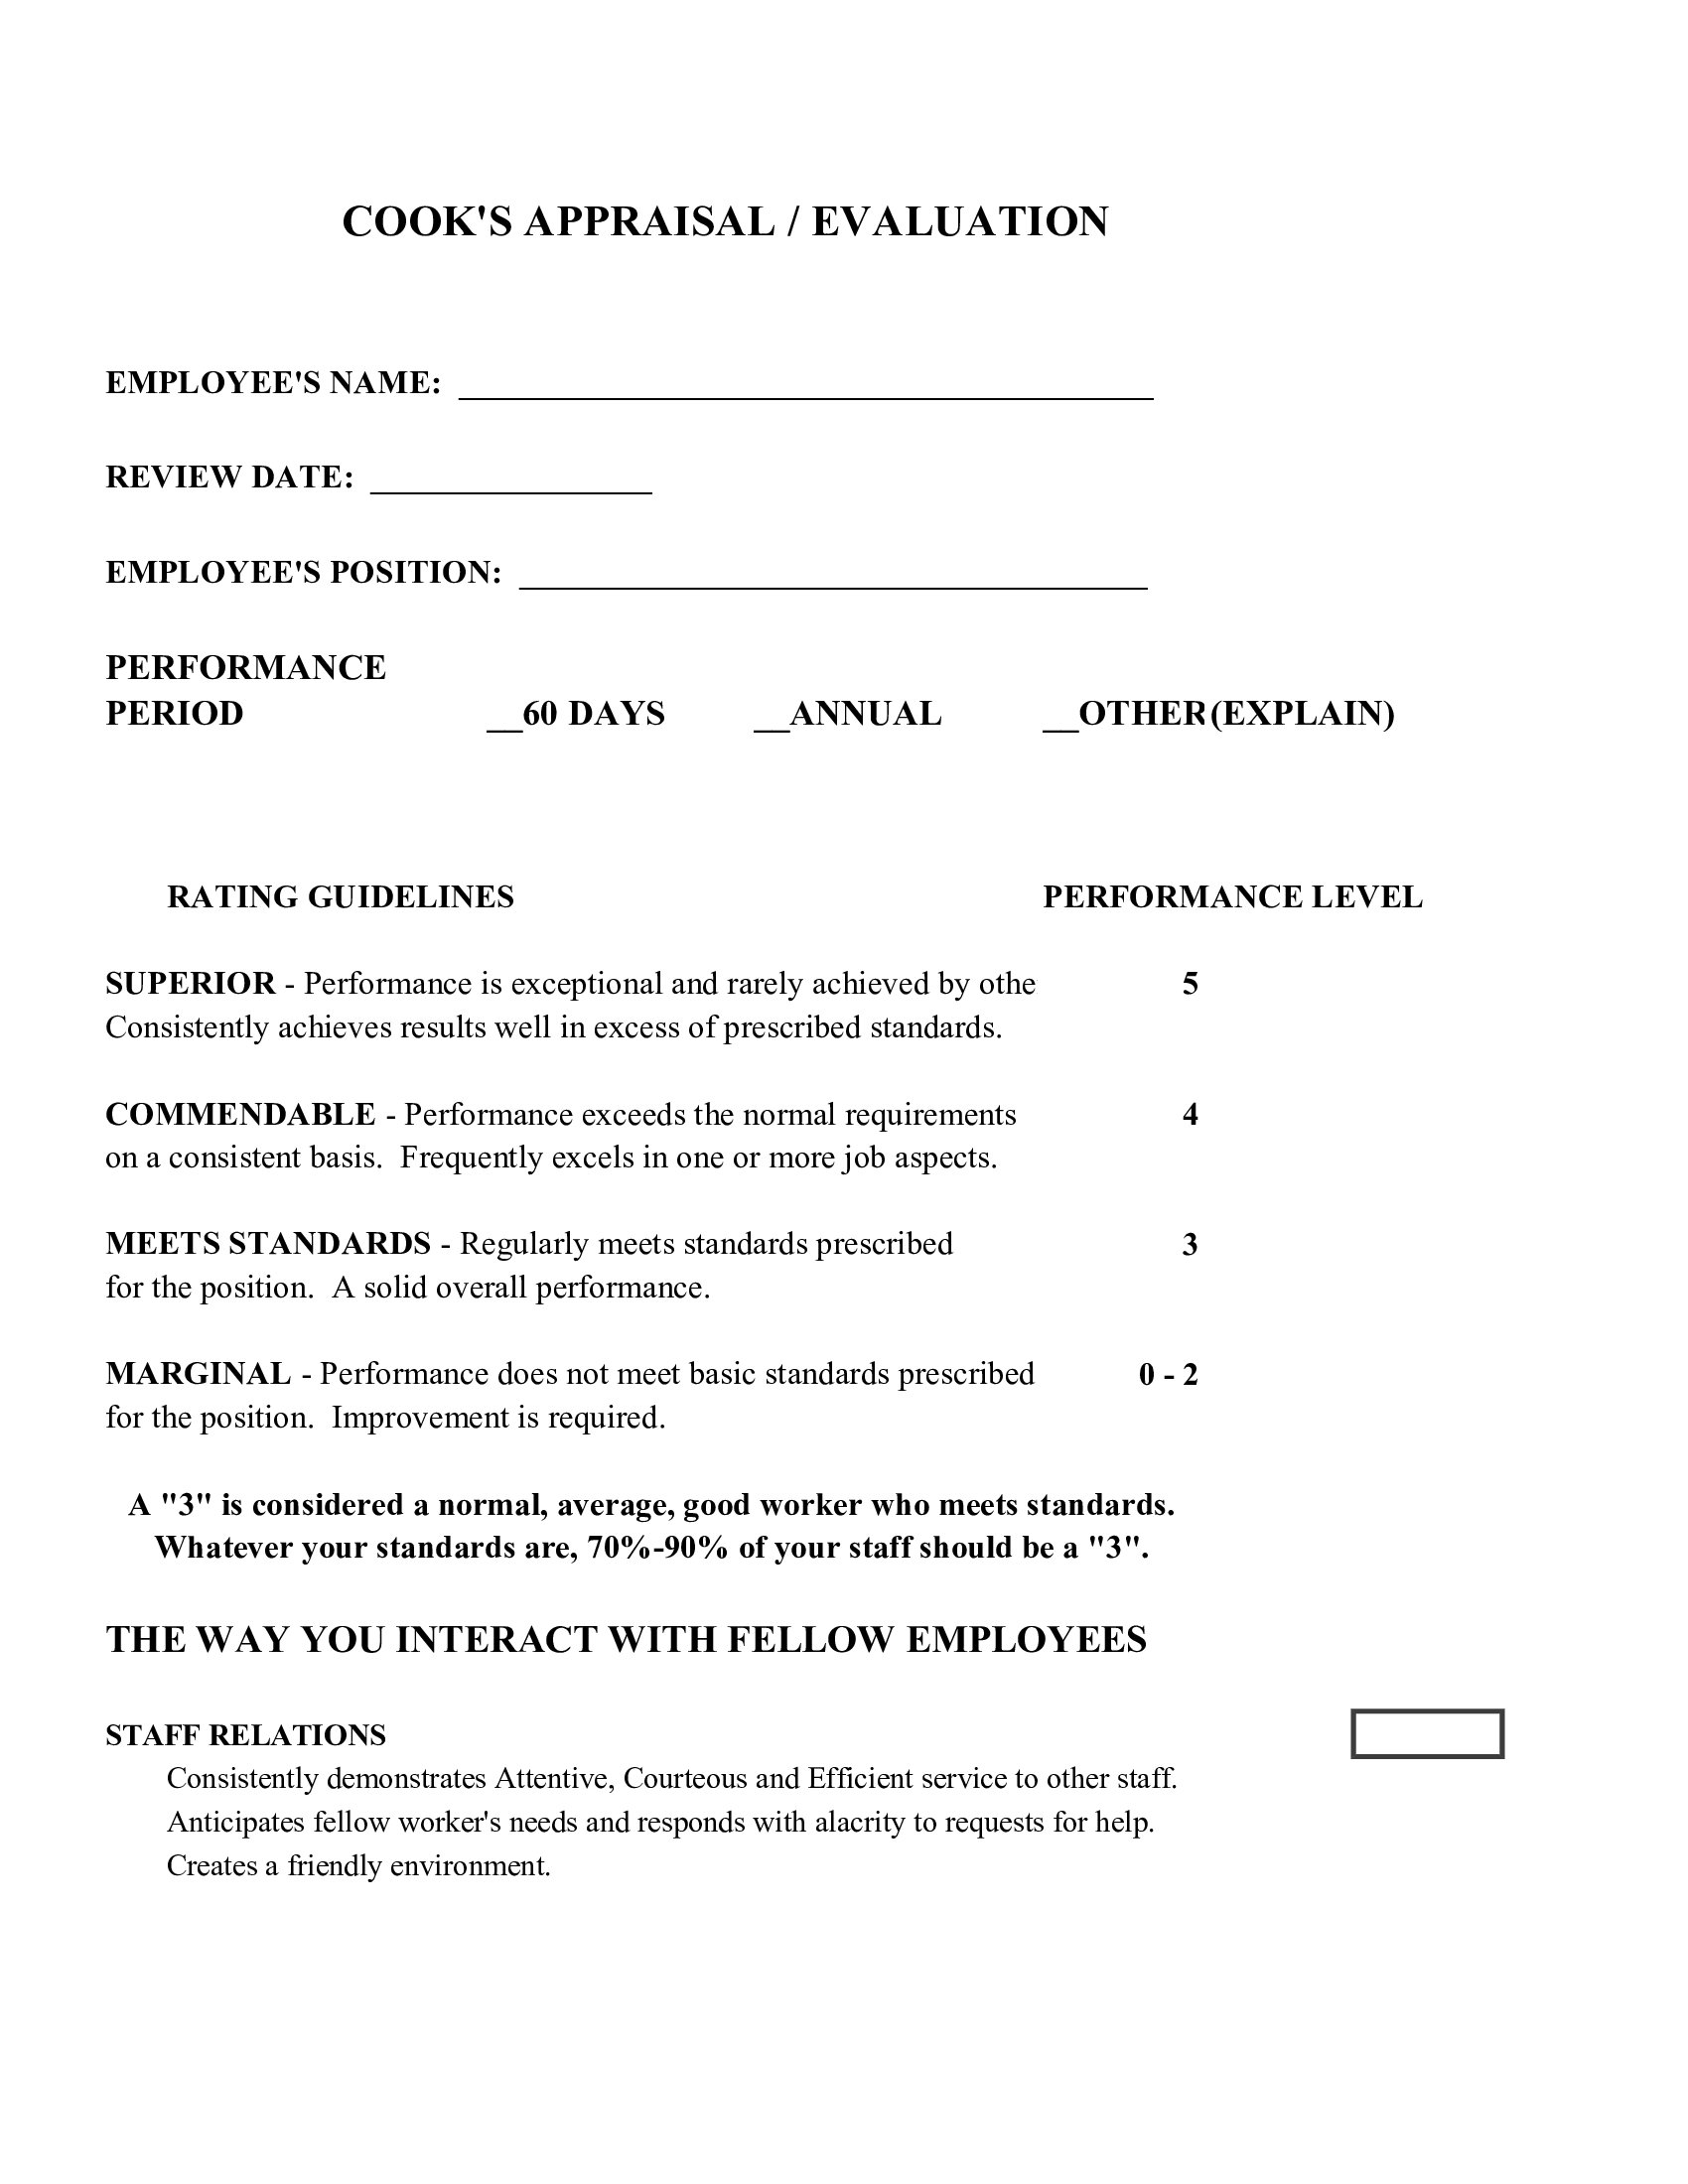 free-8-kitchen-evaluation-forms-in-pdf-ms-word